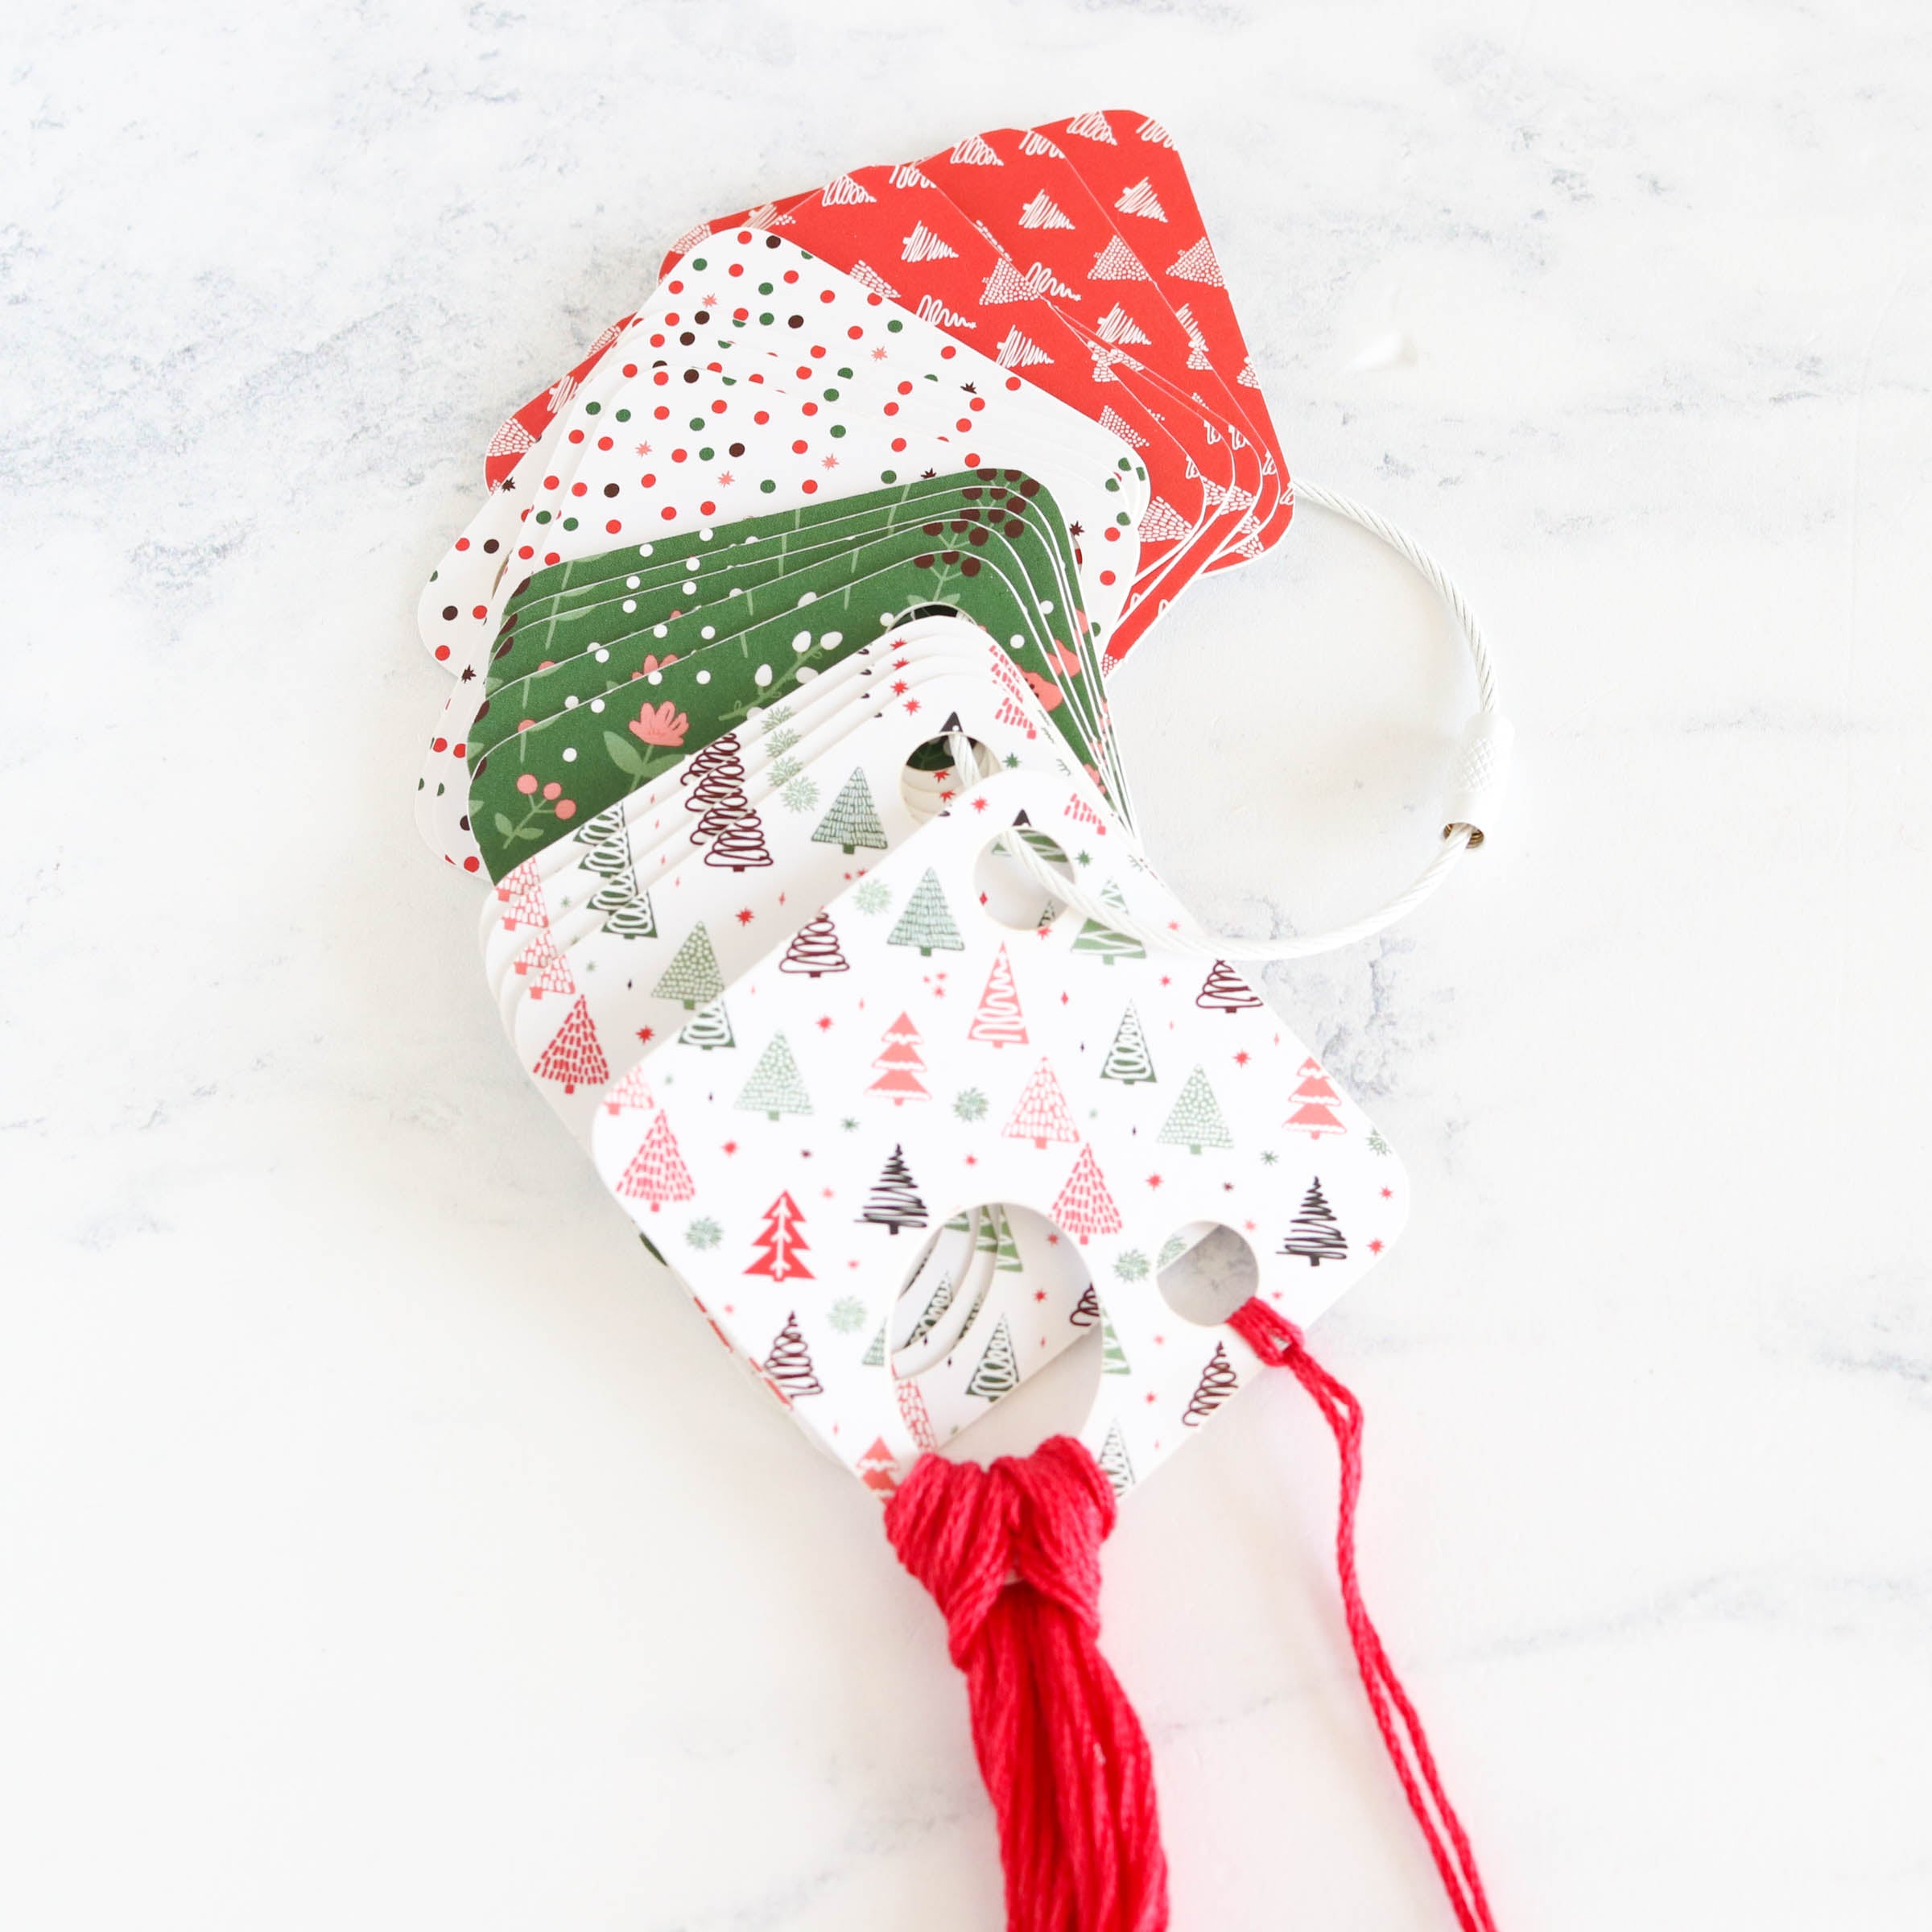 Christmas Embroidery Floss Drop Set - Limited Edition - Stitched Modern